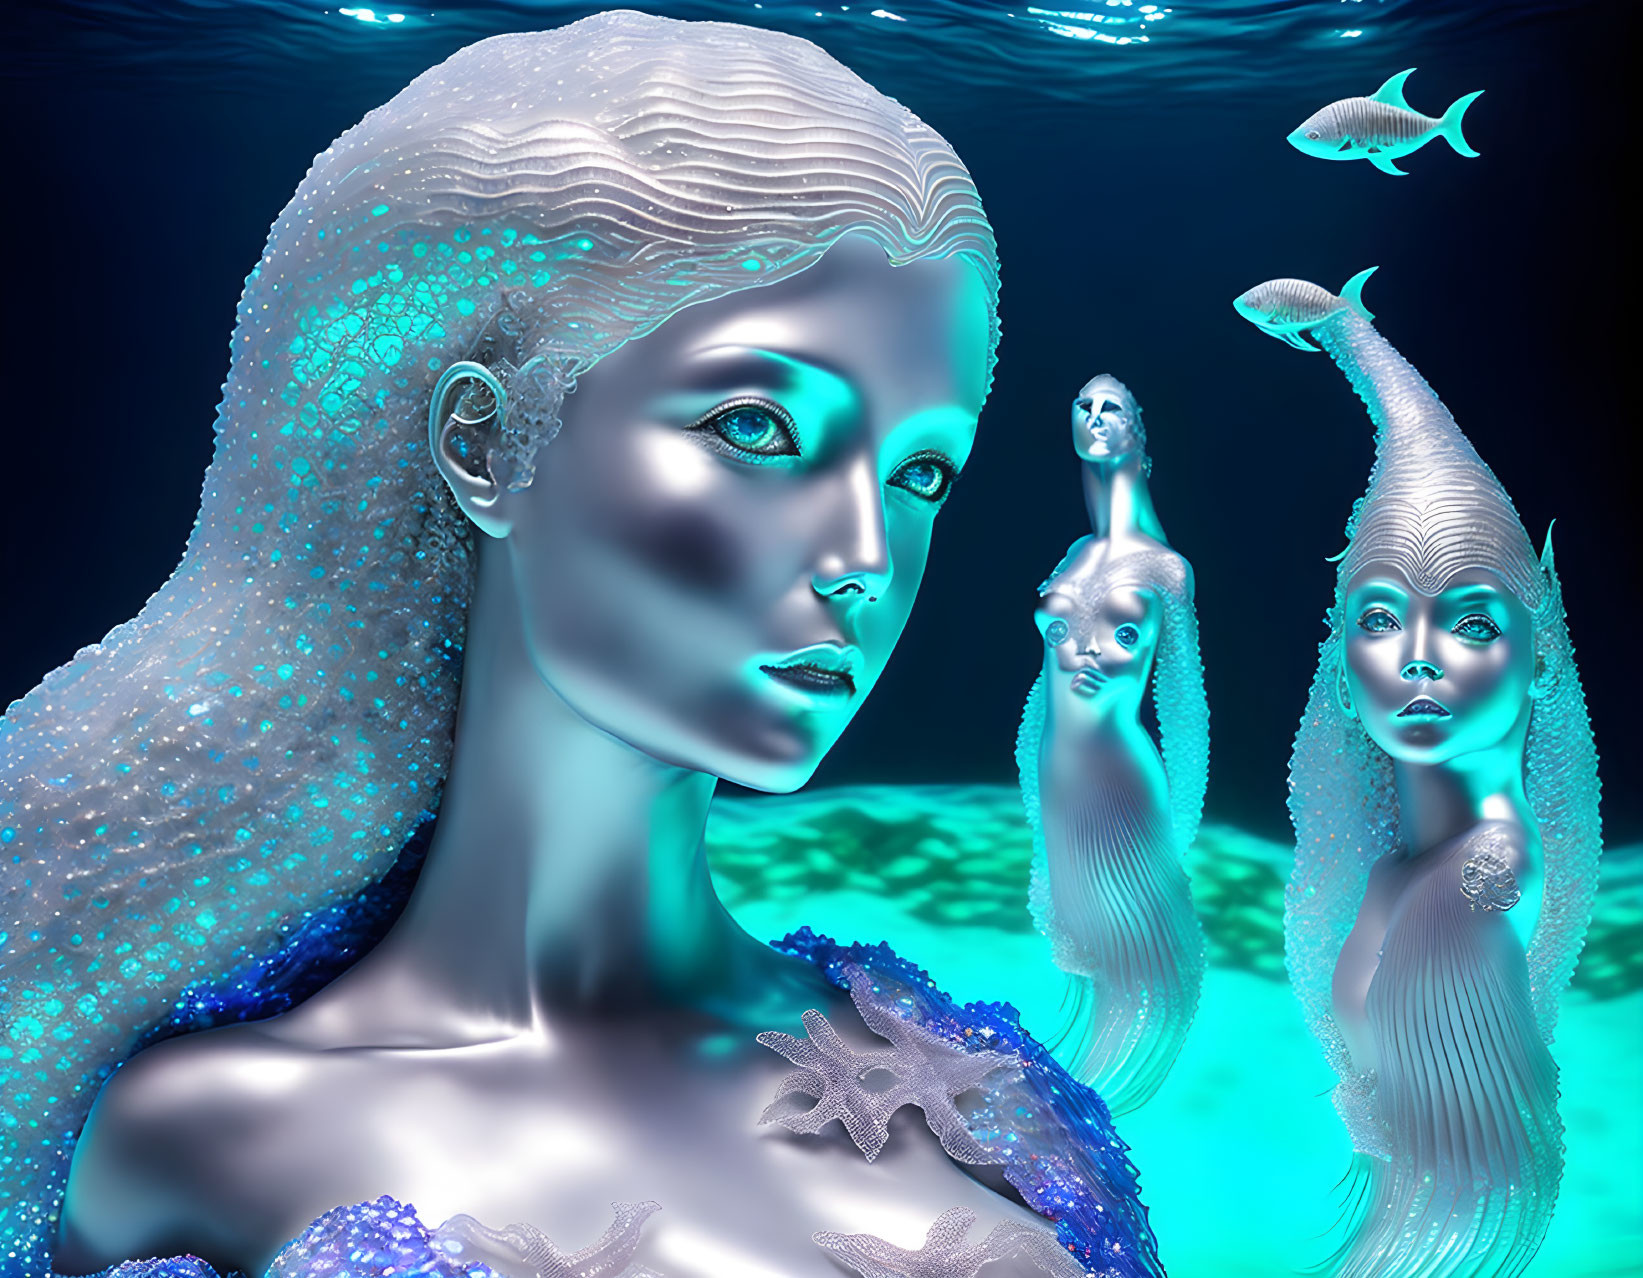 Four mermaid-like figures with shimmering scales and aquatic features in deep-sea setting.